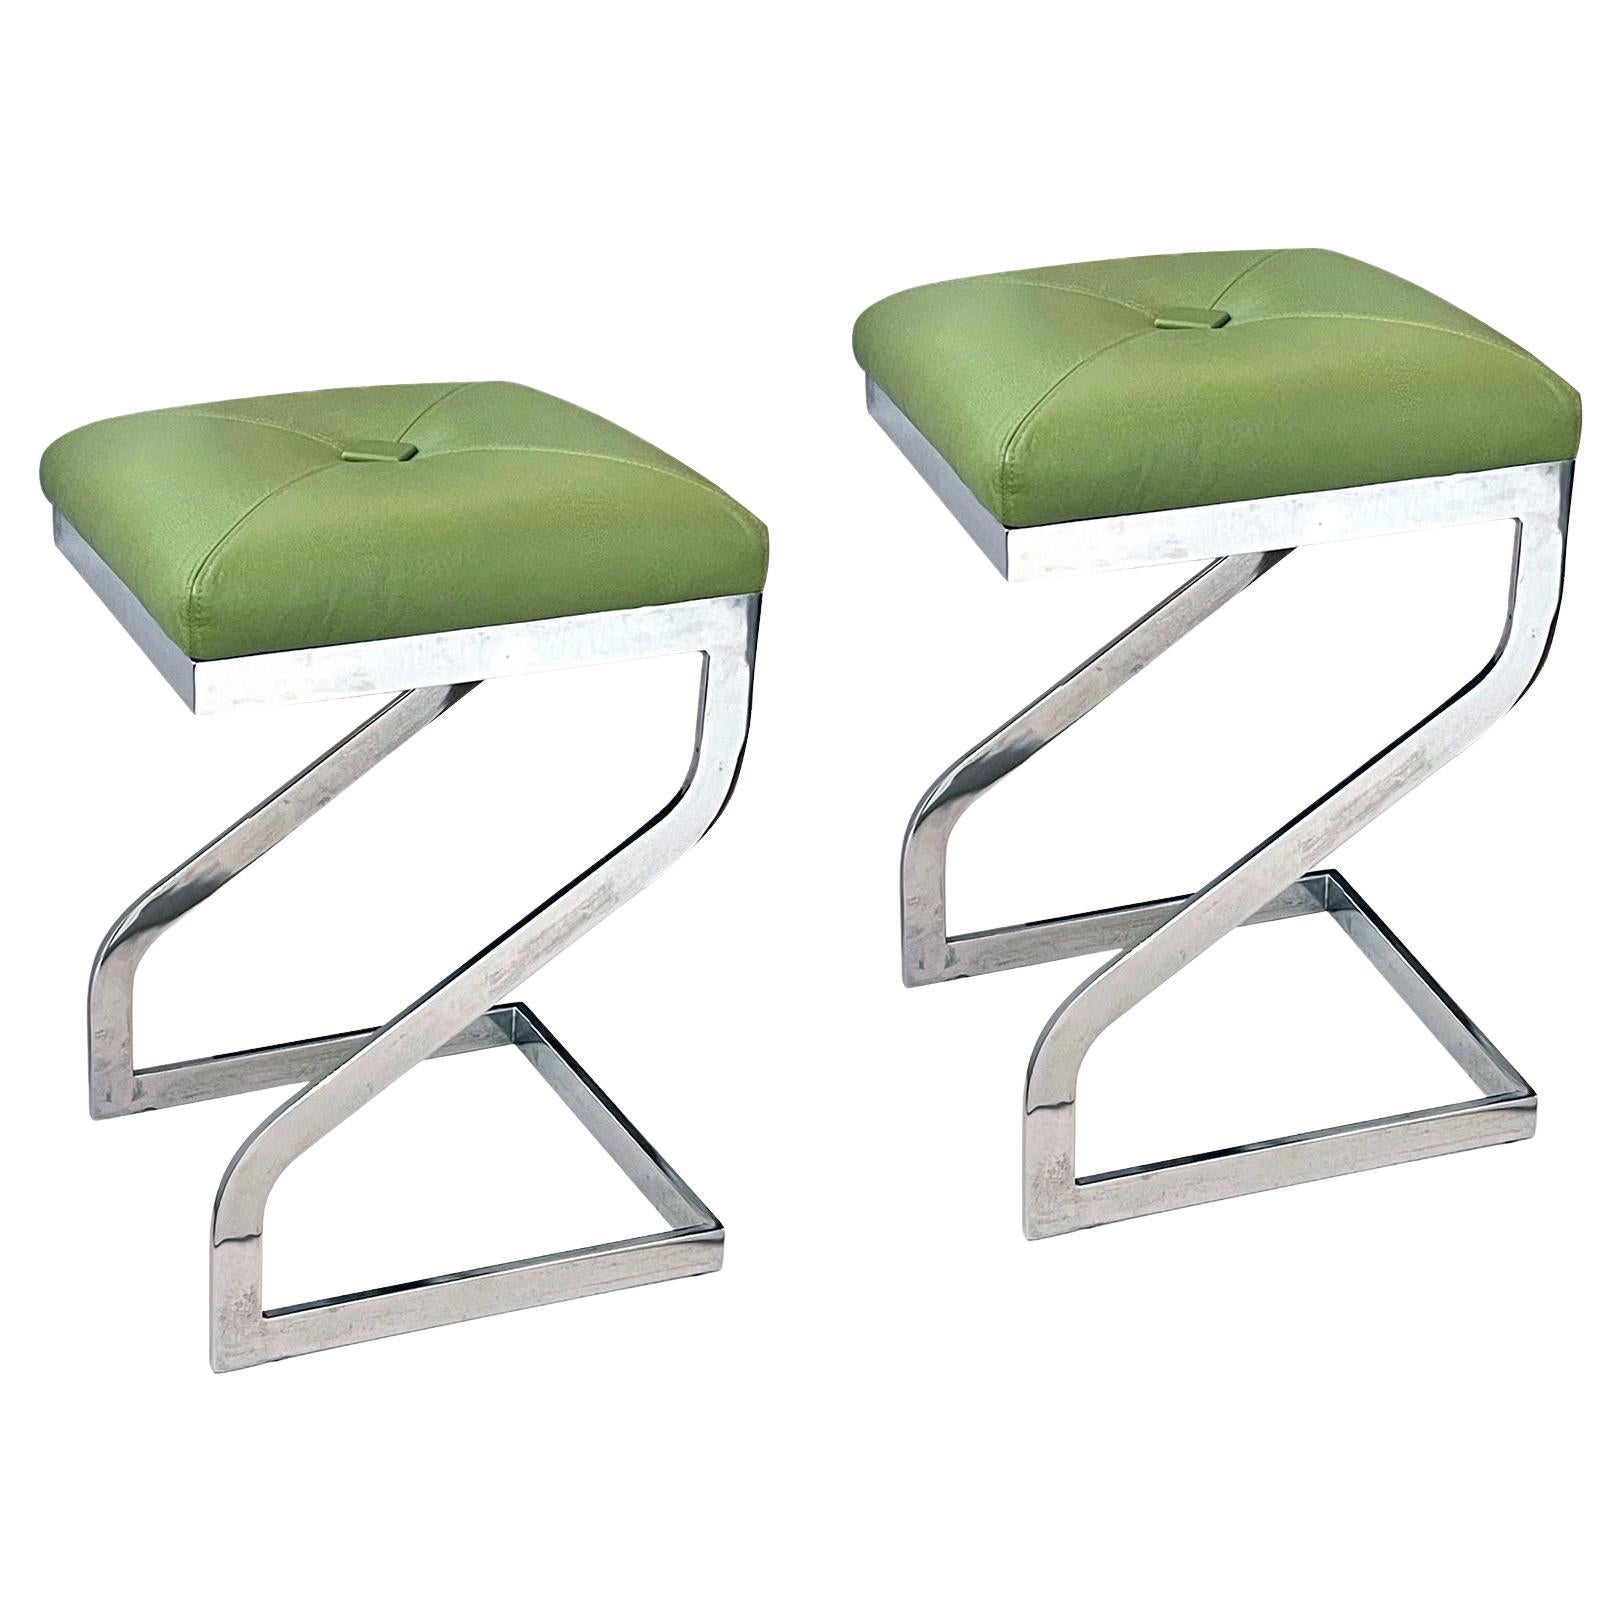 Pair of 1970's Z-Form Stools with Apple Green Leather Upholstery